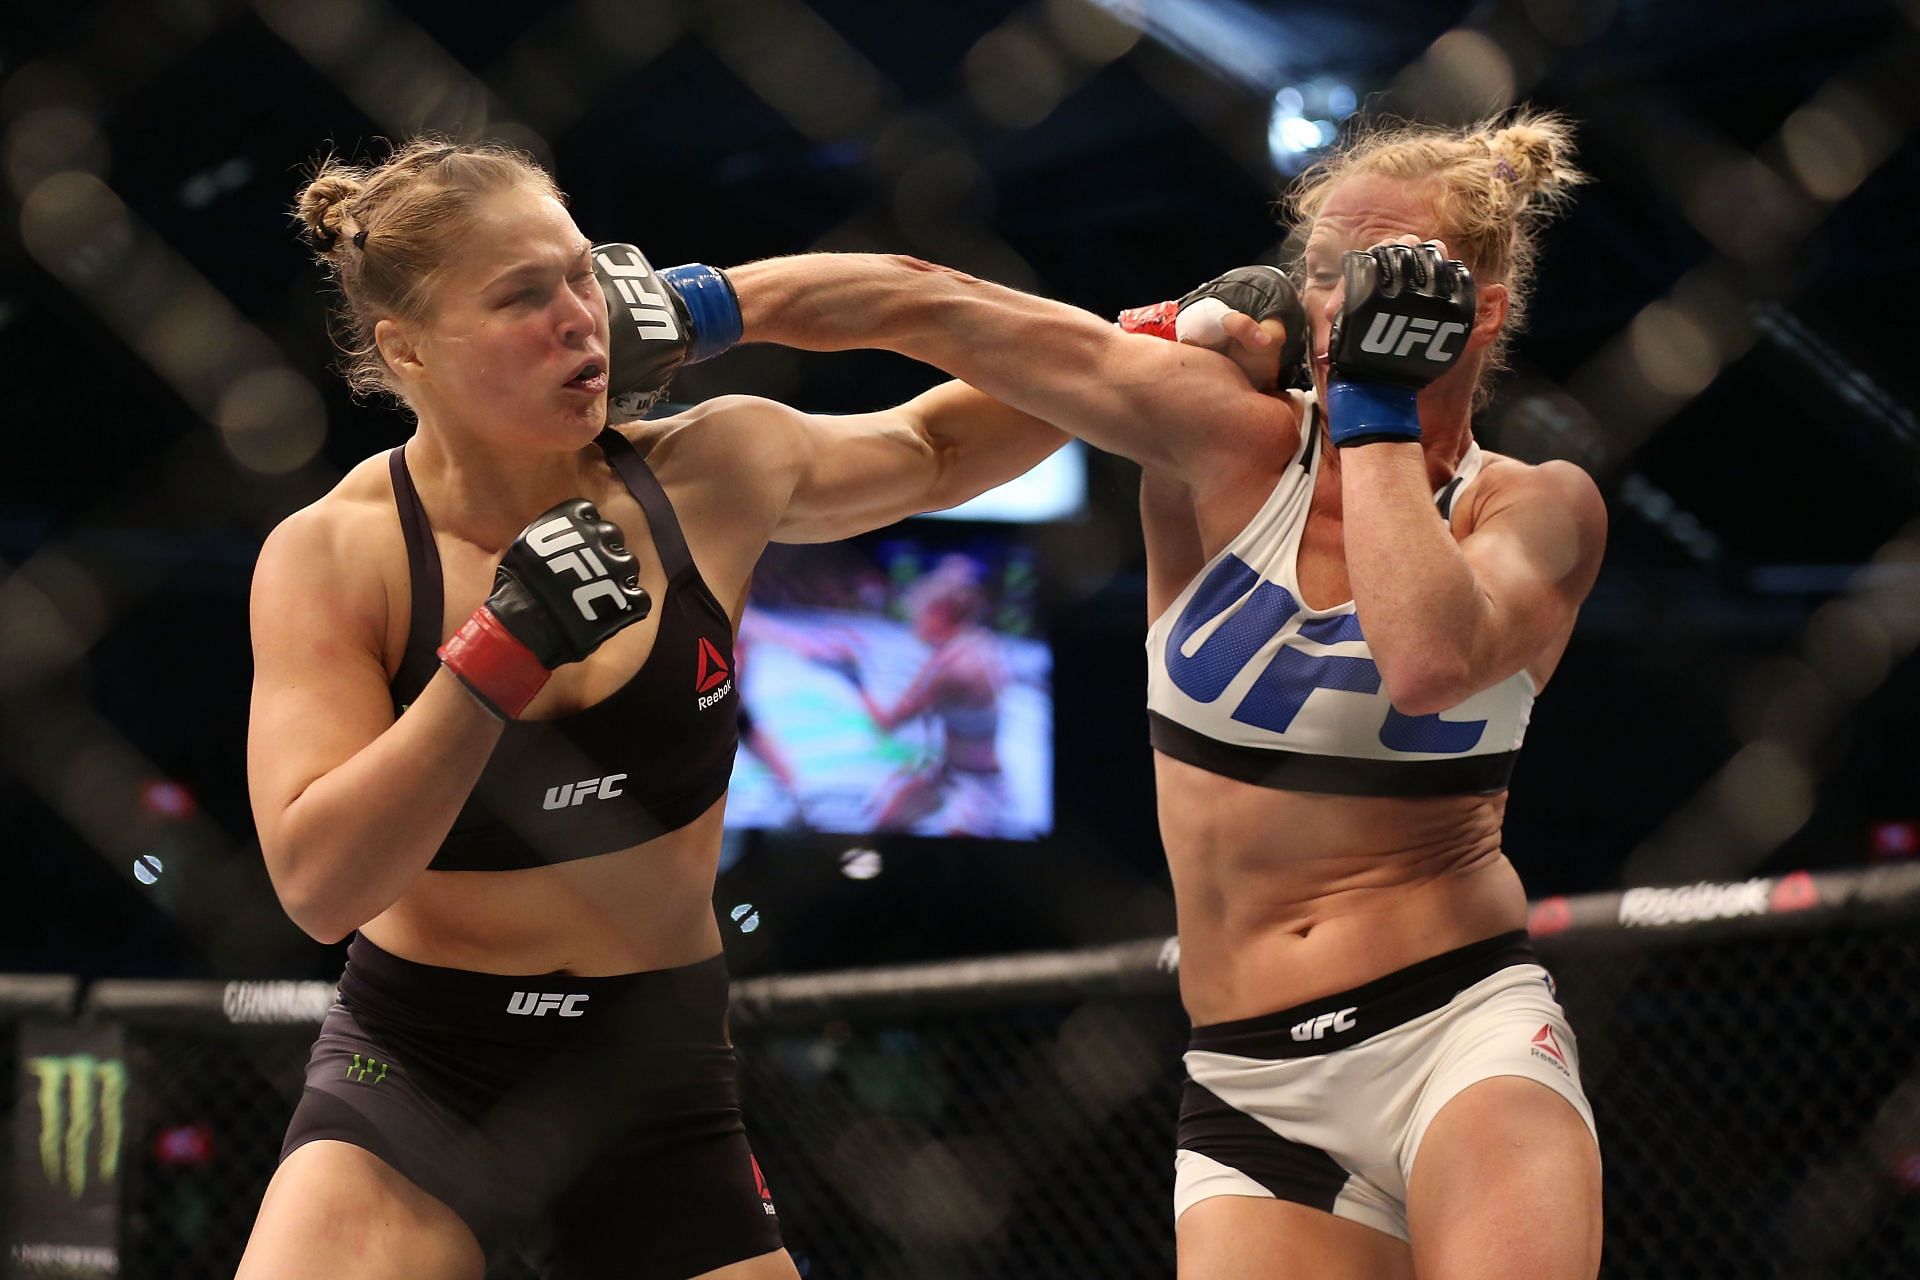 UFC 193: Ronda Rousey vs, Holly Holm